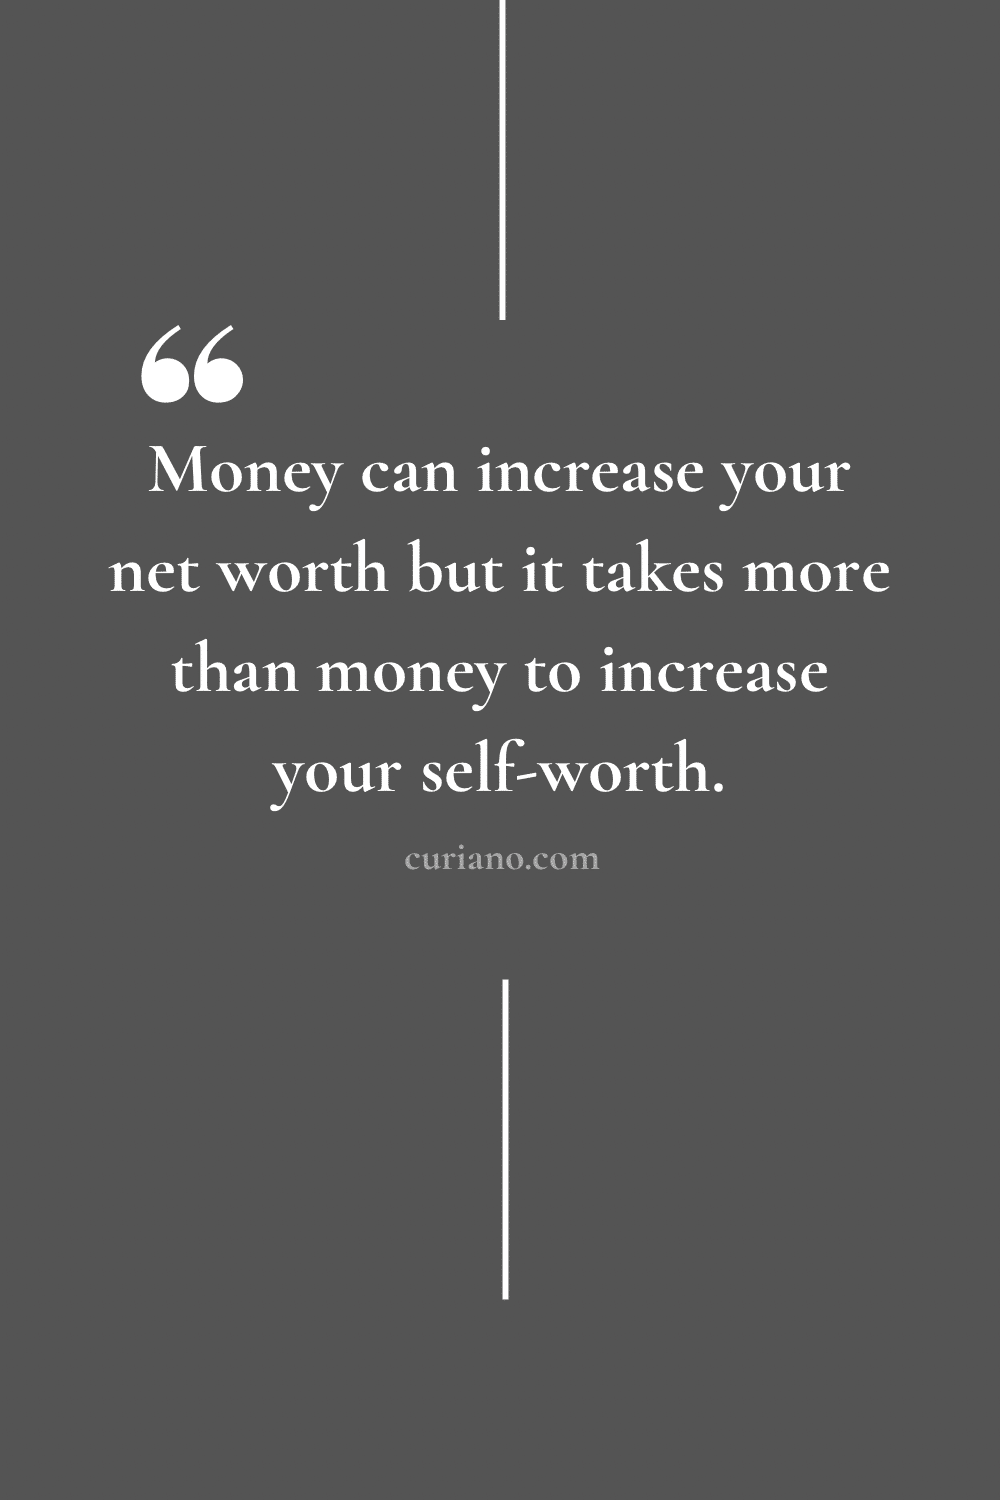 Money can increase your net worth but it takes more than money to increase your self-worth.